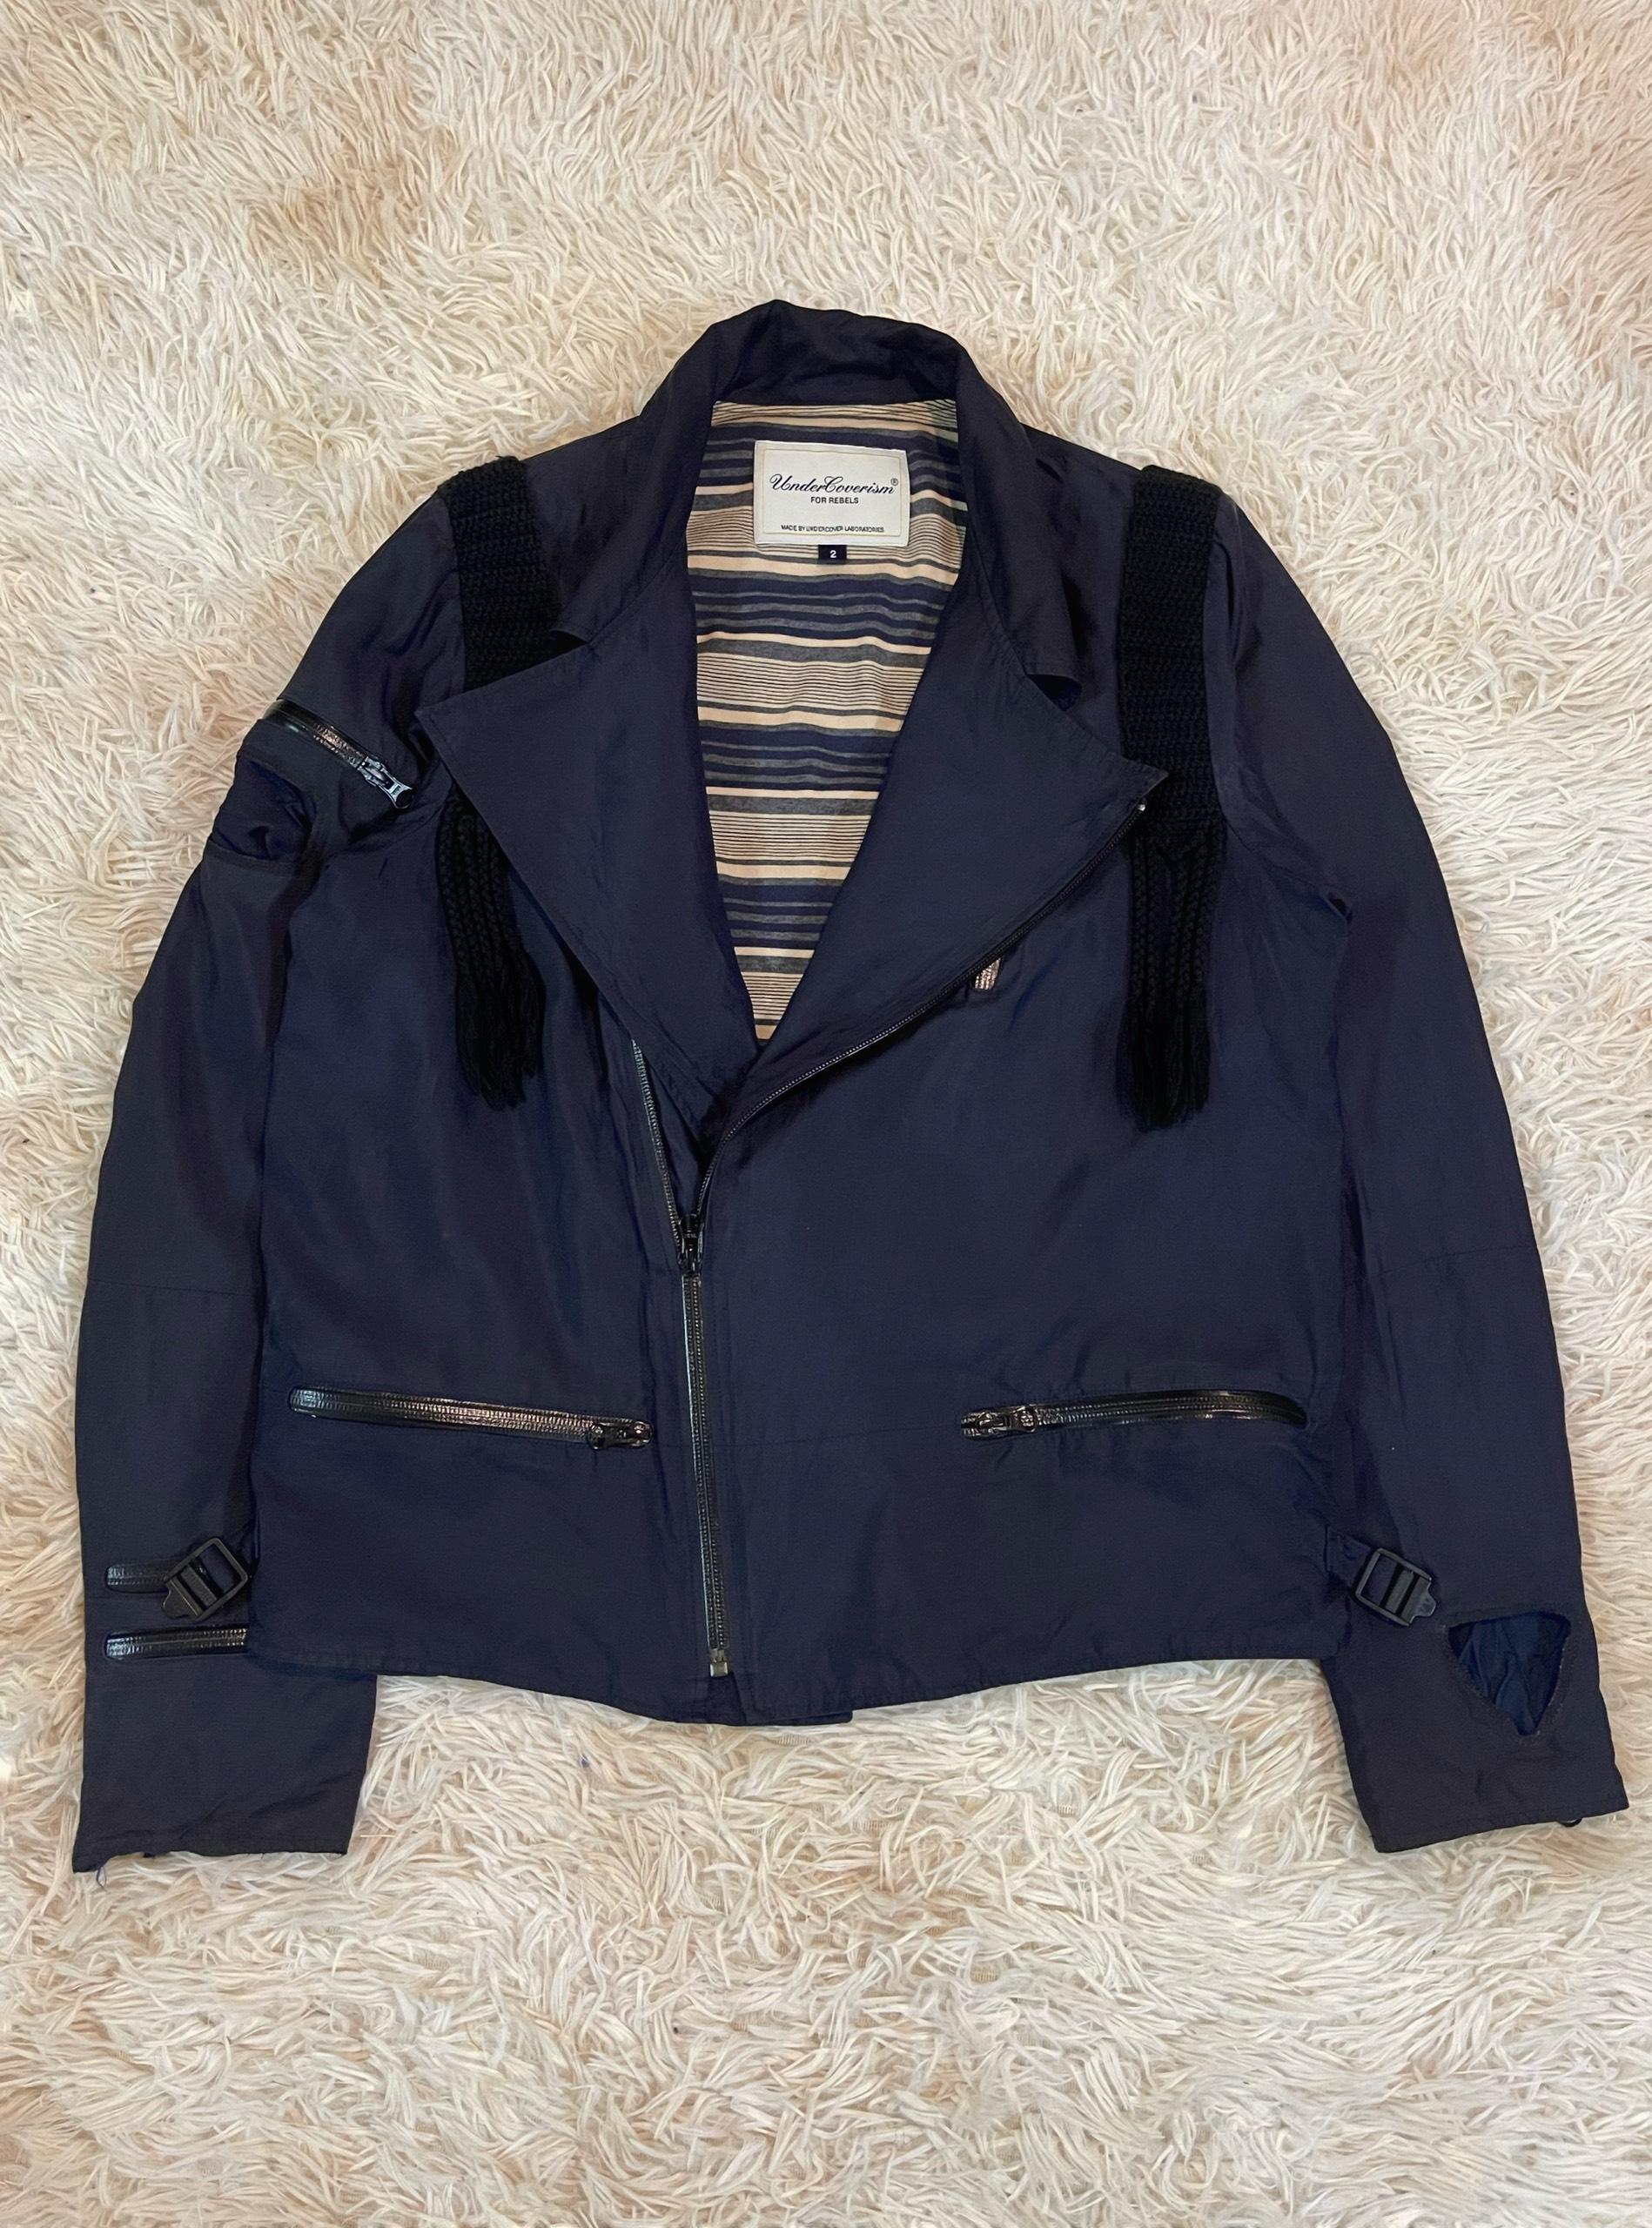 The jacket was part of Spring Summer 2007 collection, the season has a range of different silk riders jacket

Silhouette: comfortable, slim fit riders jacket with many lot of details

Fabric: Cotton/Linen exterior

Lining: Silk

Season: Spring